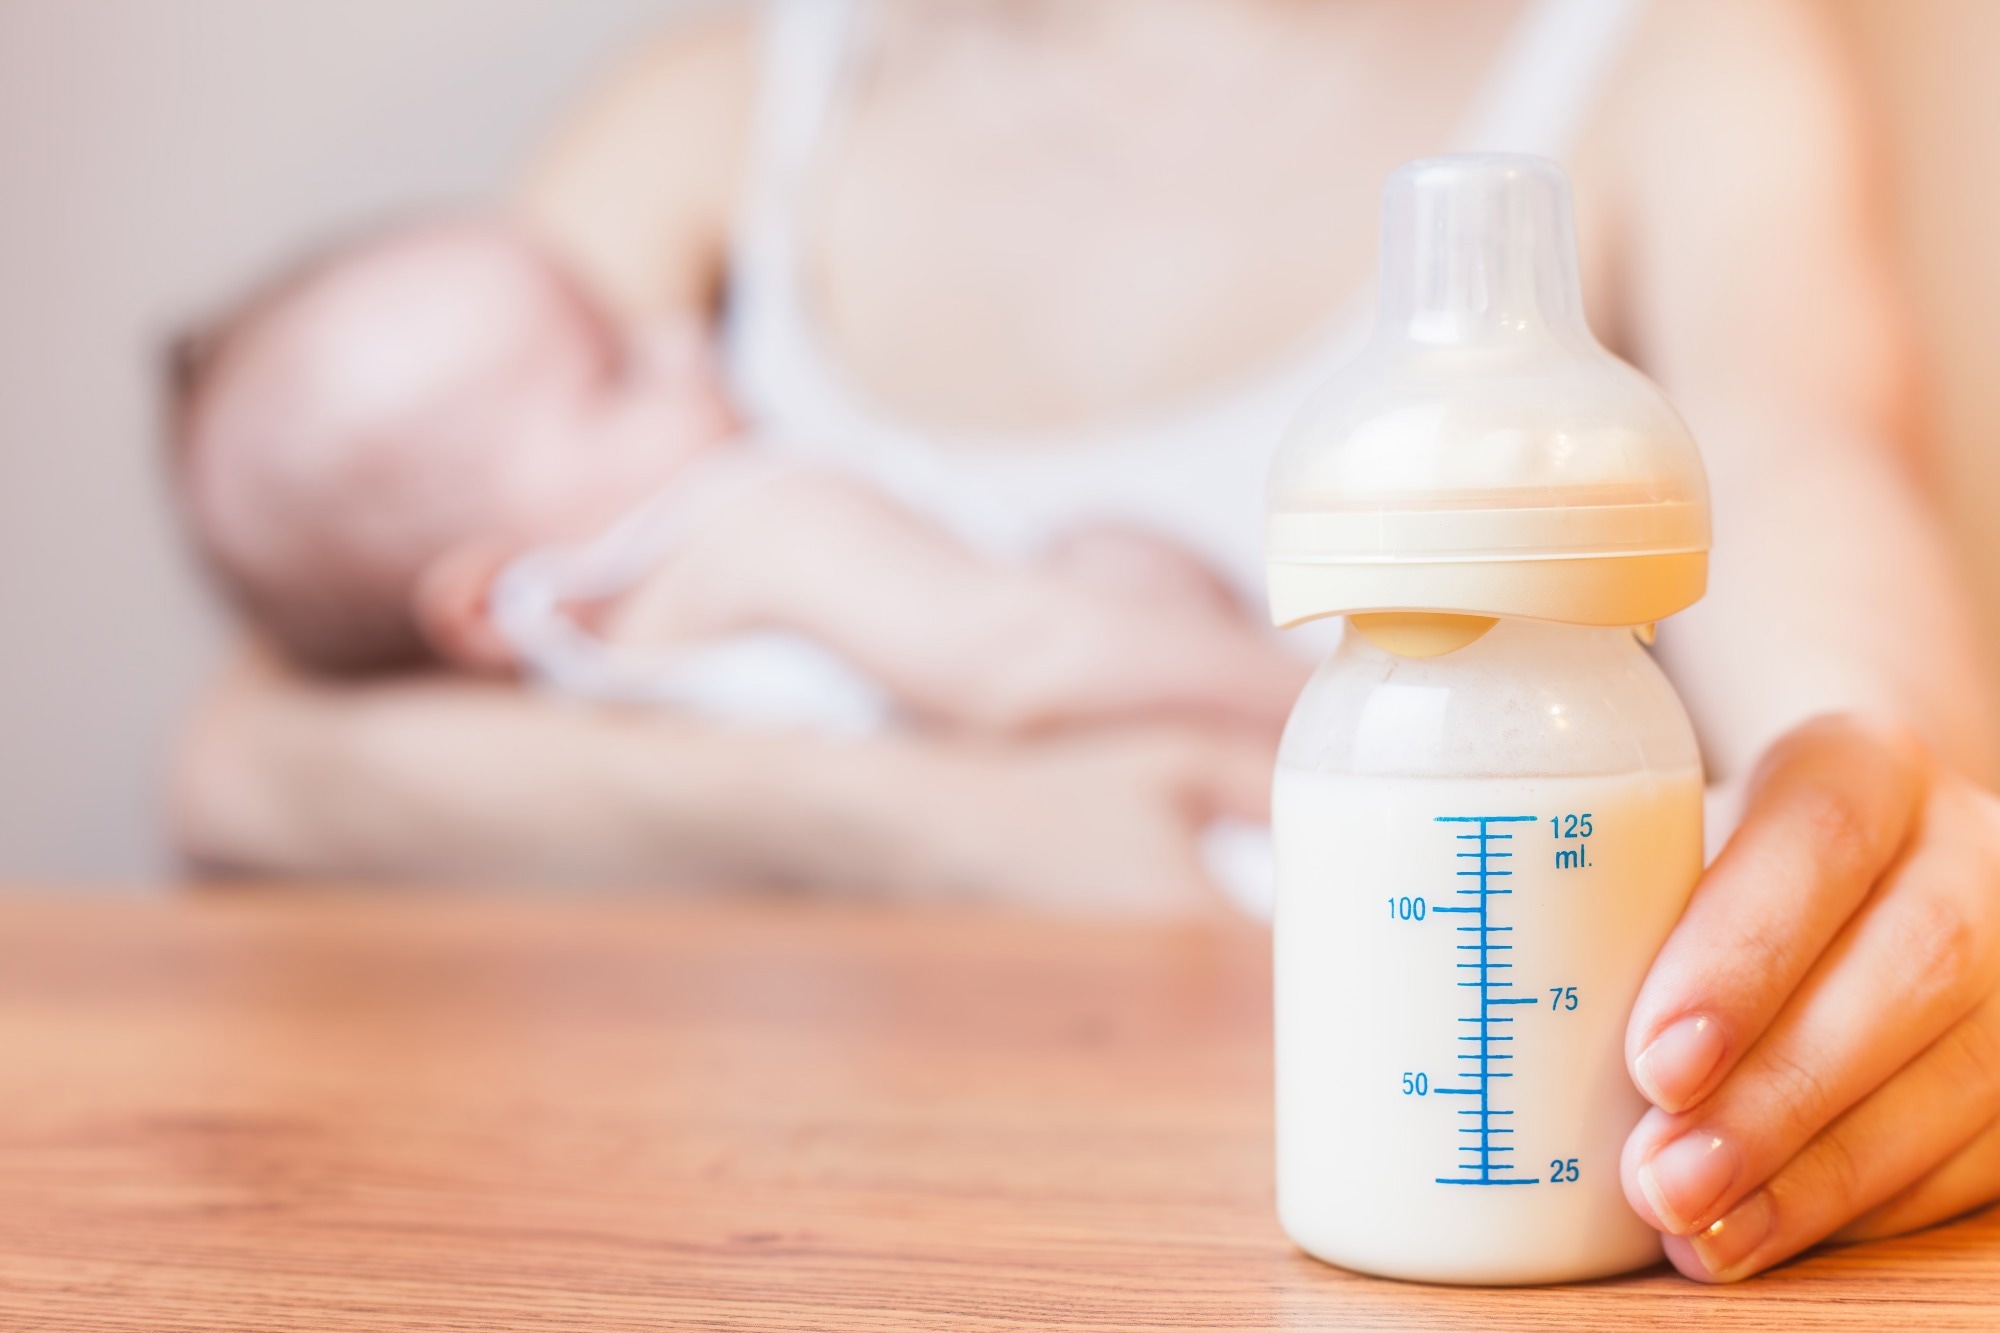 Study: Human milk-associated bacterial communities associate with the infant gut microbiome over the first year of life. Image Credit: Pavel Ilyukhin / Shutterstock.com